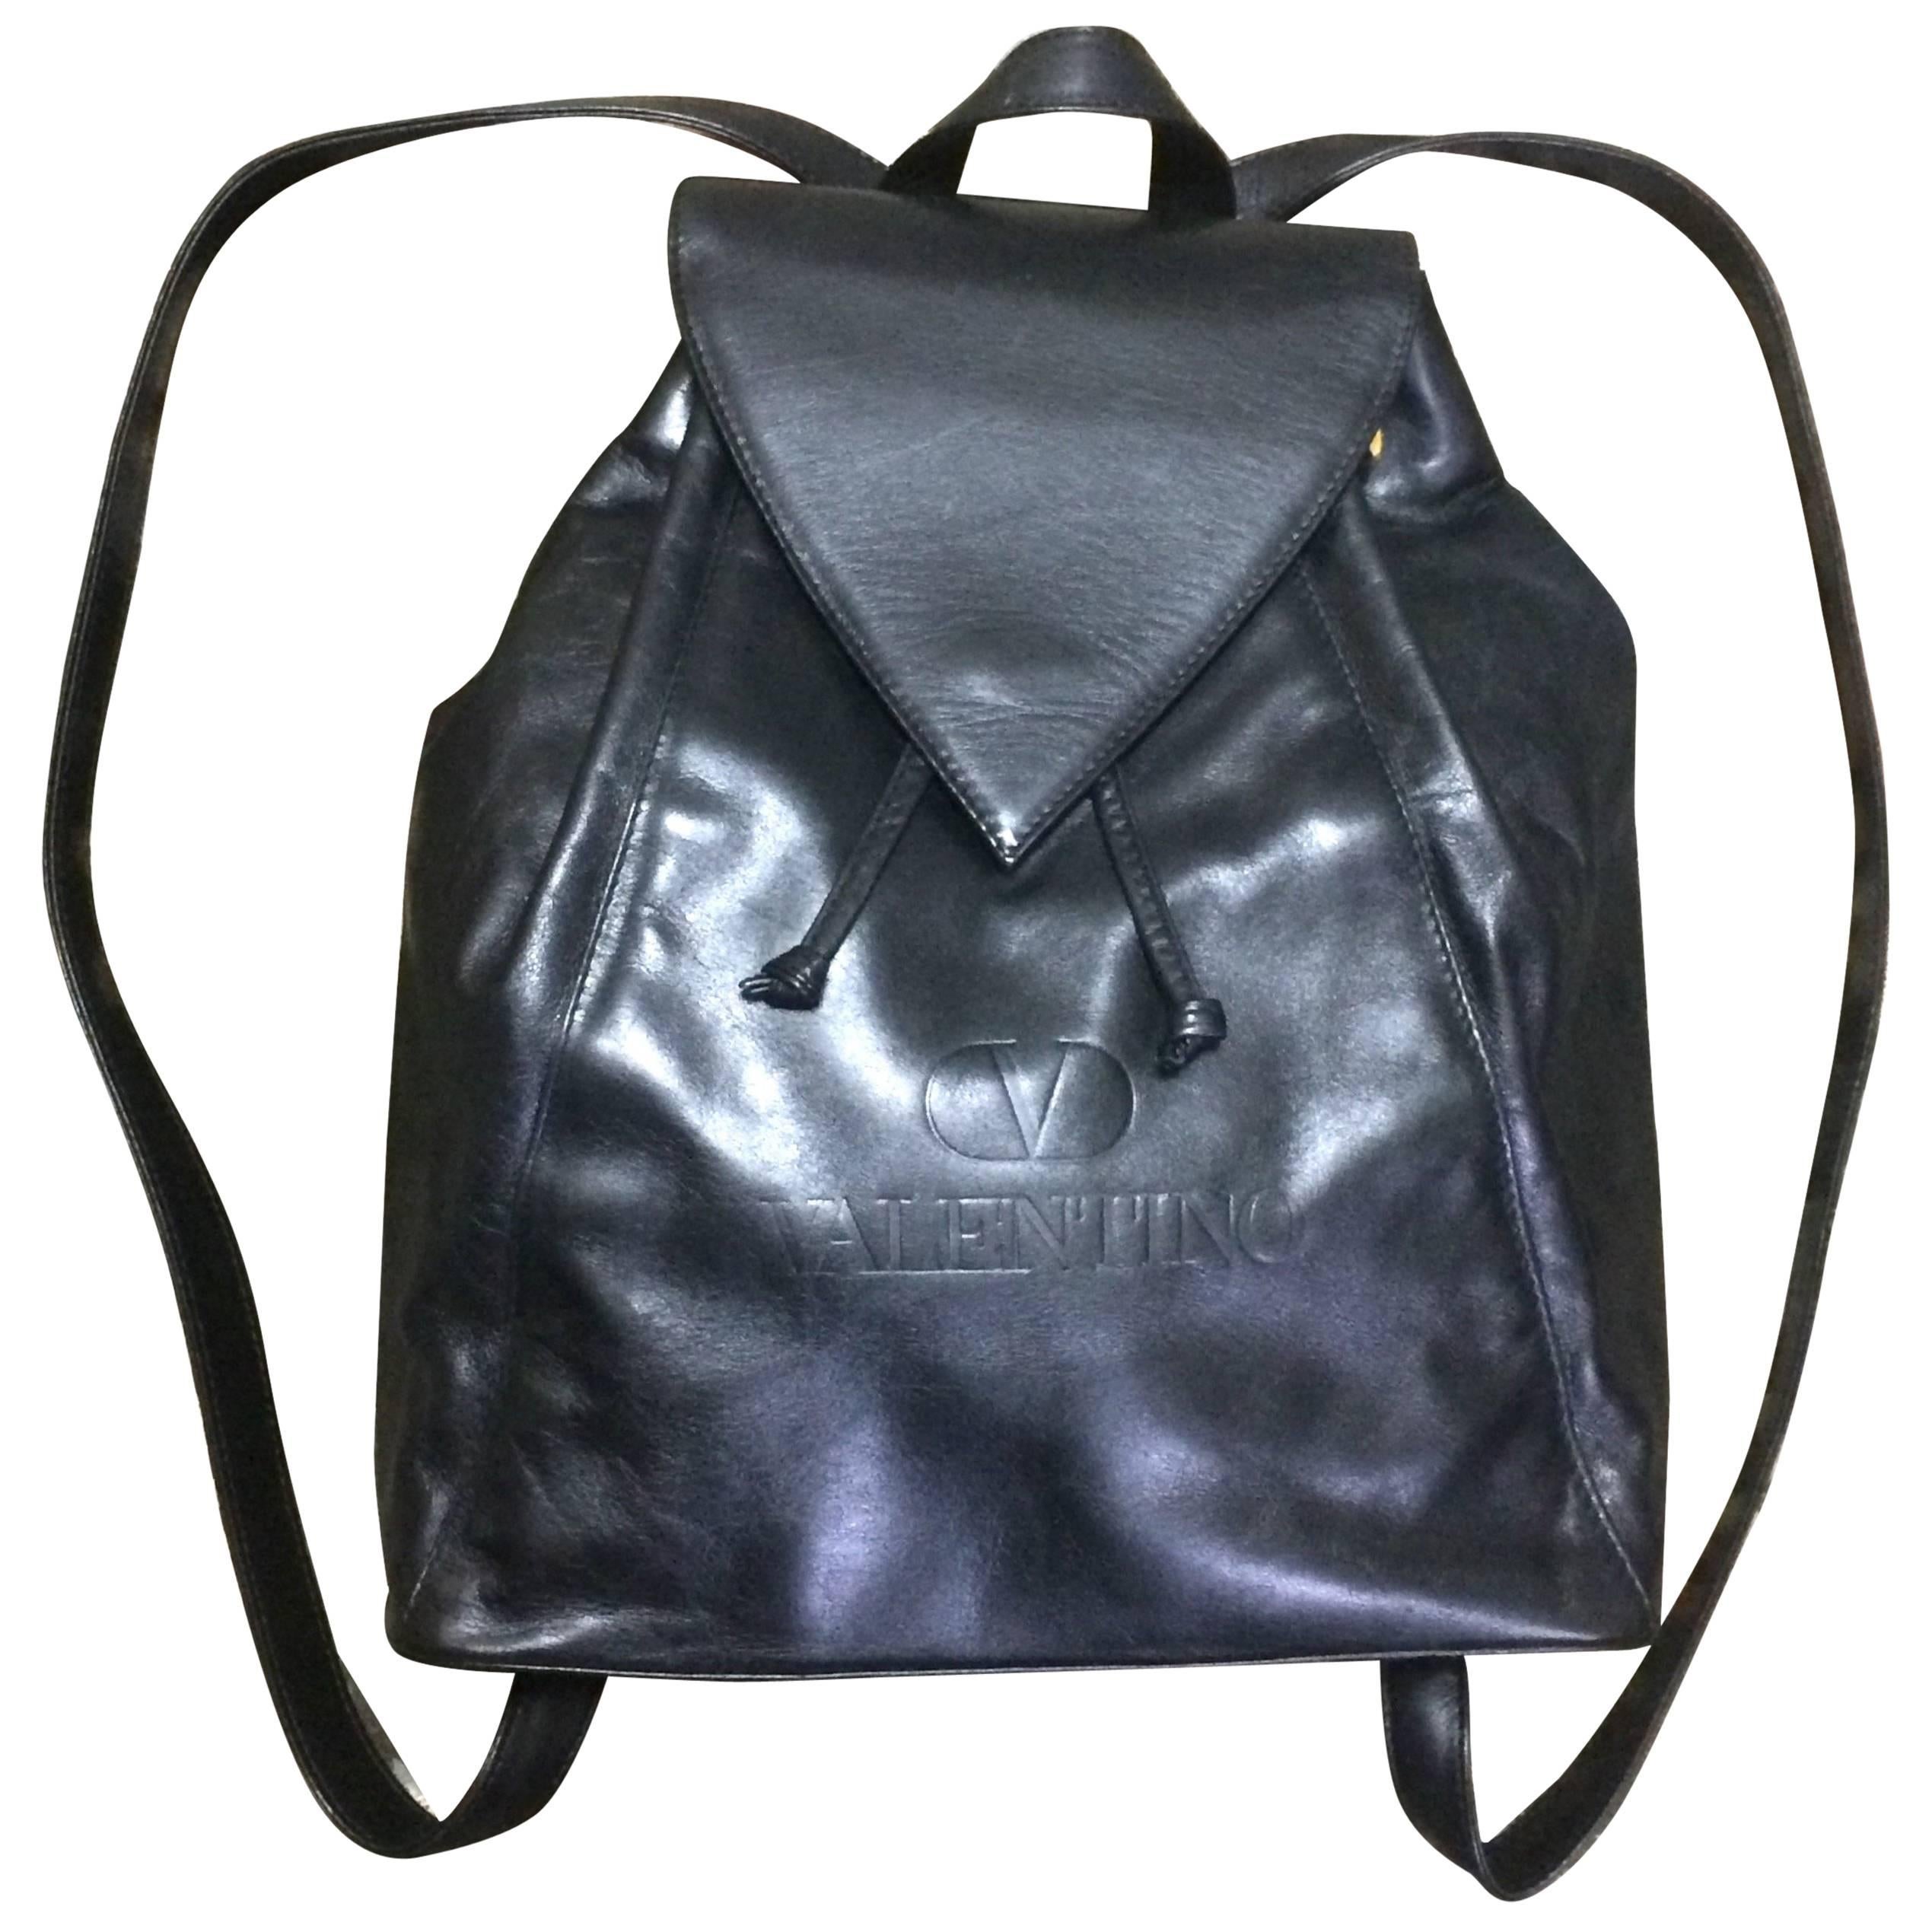 Vintage Valentino black nappa leather backpack with embossed logo. Classic bag.